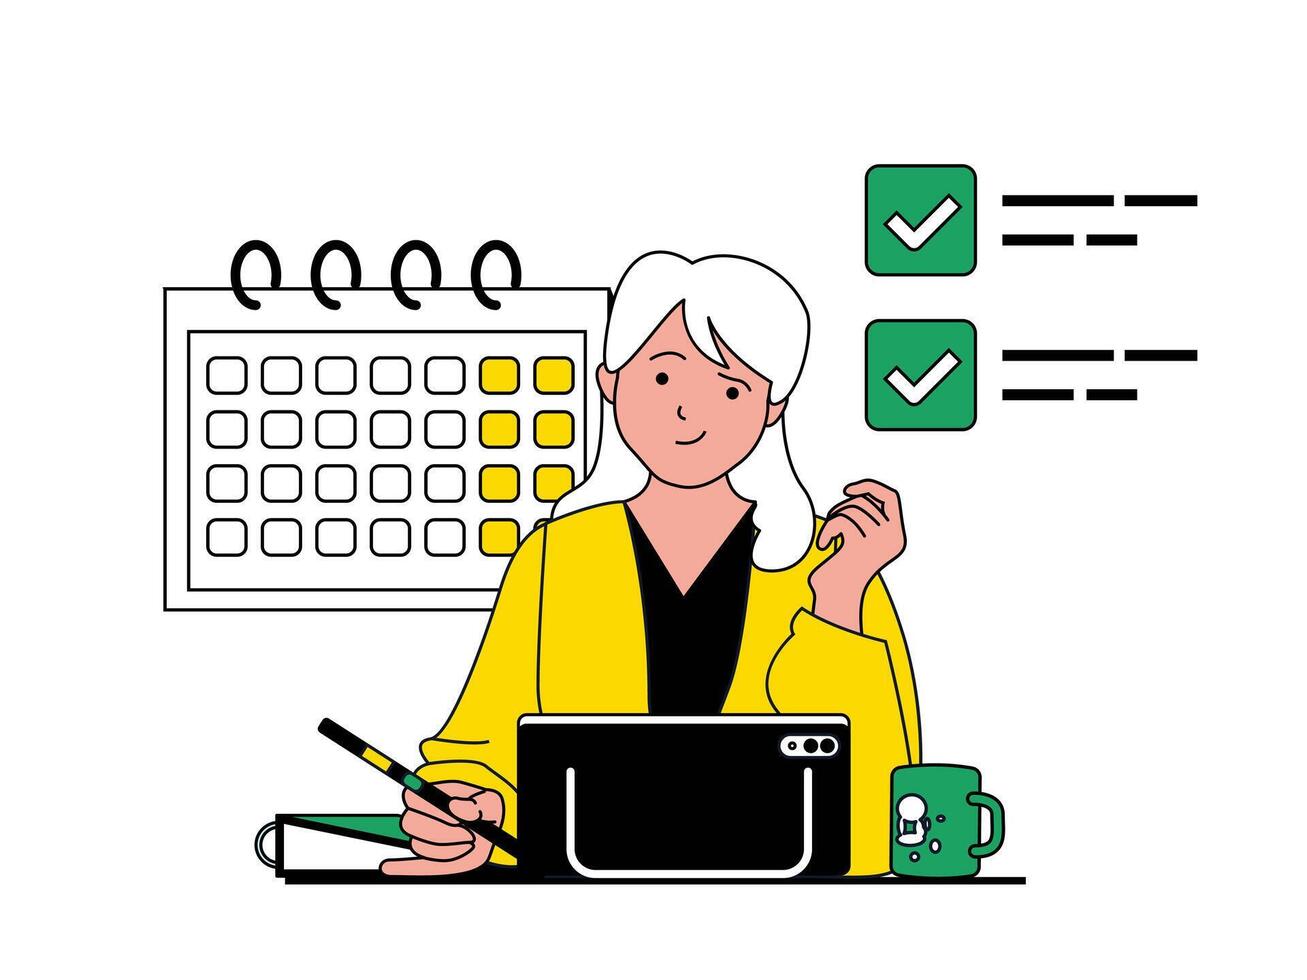 Productivity workplace concept with character situation. Woman plans tasks on calendar and successfully completes tasks before deadline. Vector illustration with people scene in flat design for web